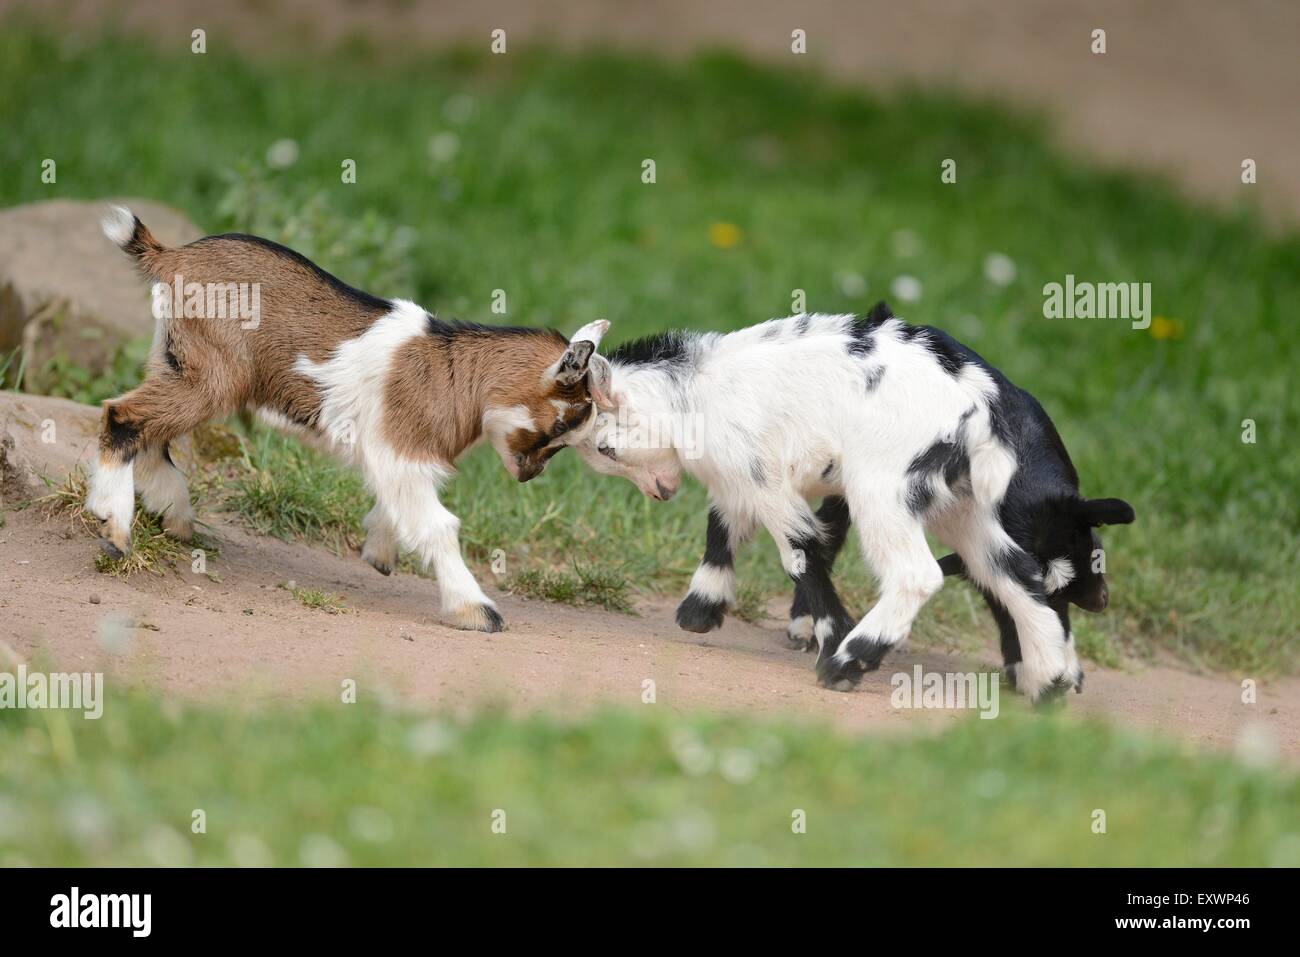 Two domestic goat kids fighting on a meadow Stock Photo